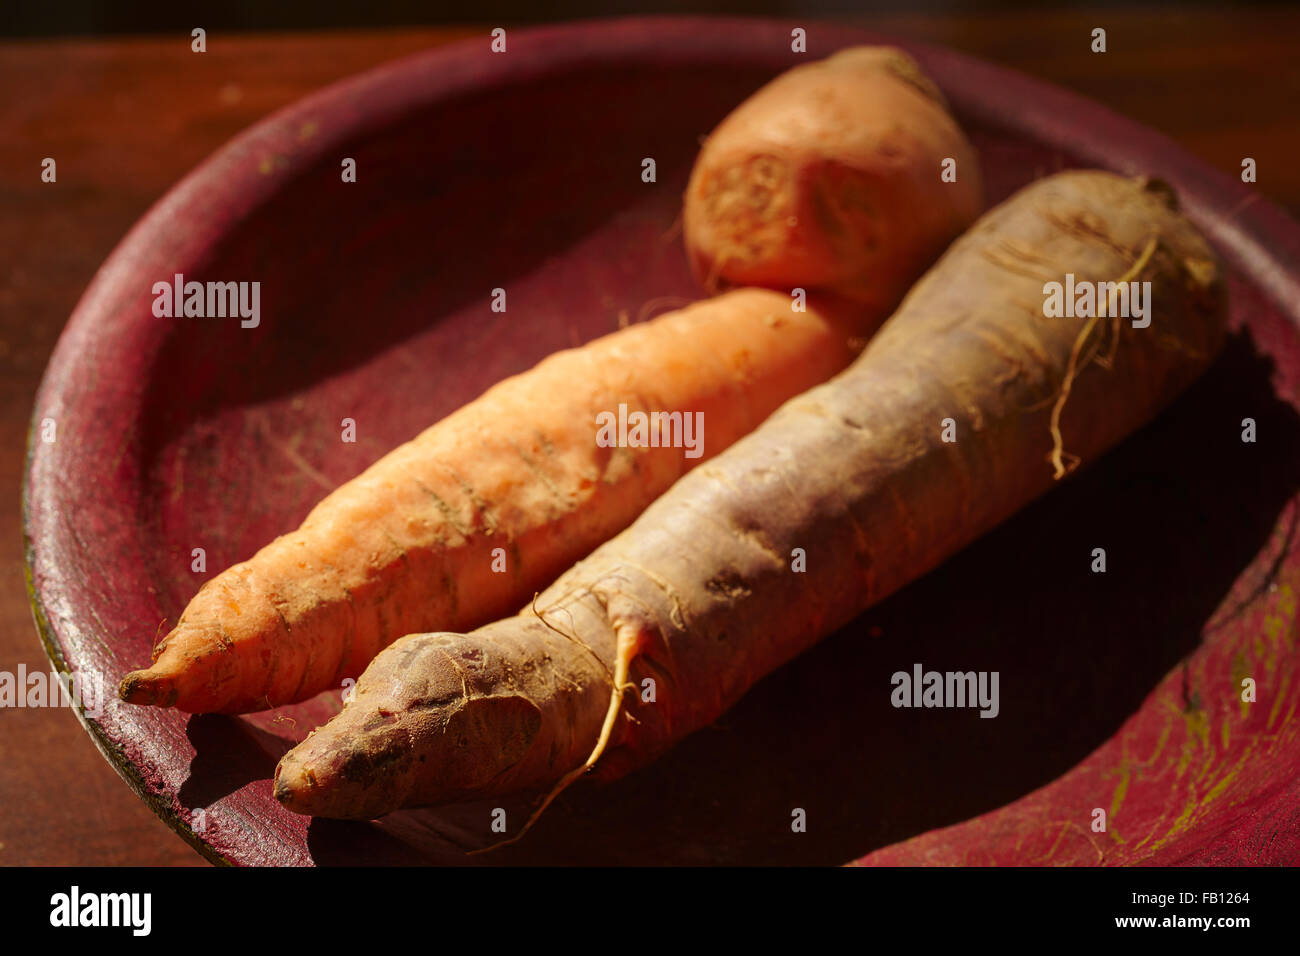 ugly carrots in a red wooden bowl Stock Photo